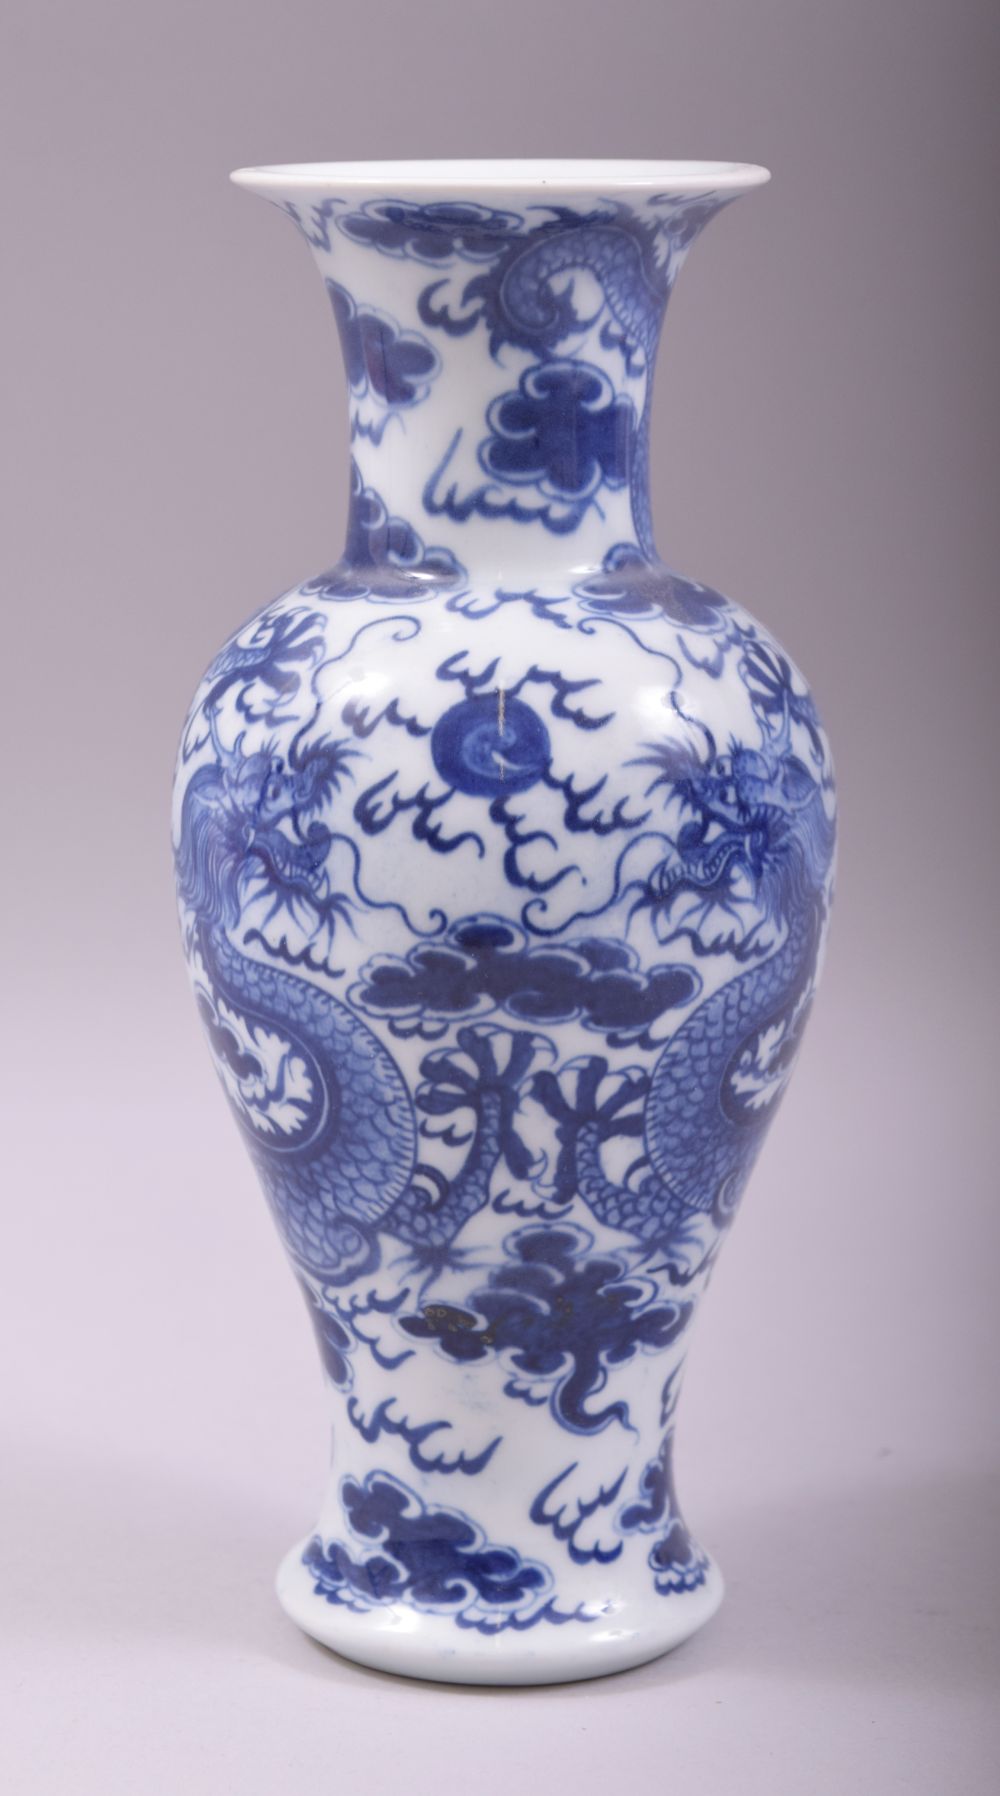 A CHINESE BLUE AND WHITE PORCELAIN DRAGON VASE, 23.5cm high.